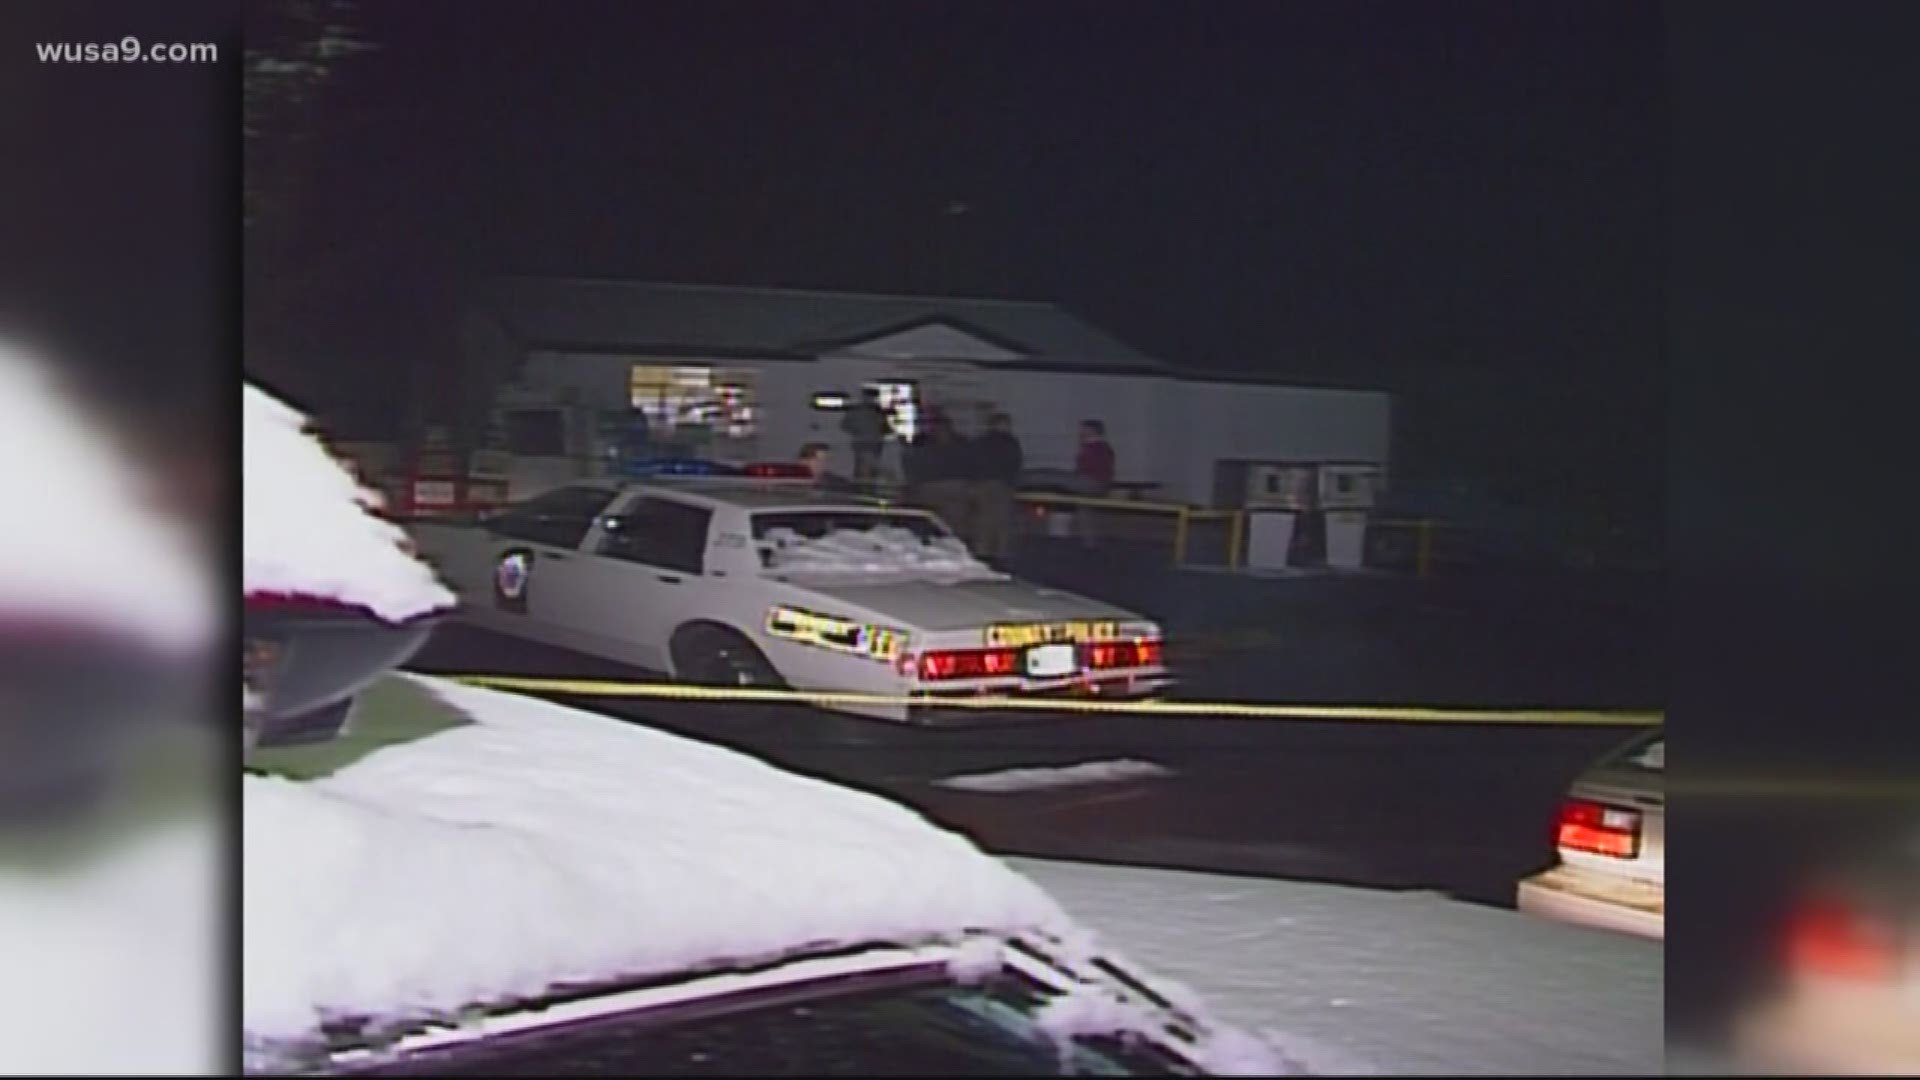 A neighbor captured the moment U.S. Marshals and Montgomery County cold case detectives fatally shot the suspect in a 1992 murder.